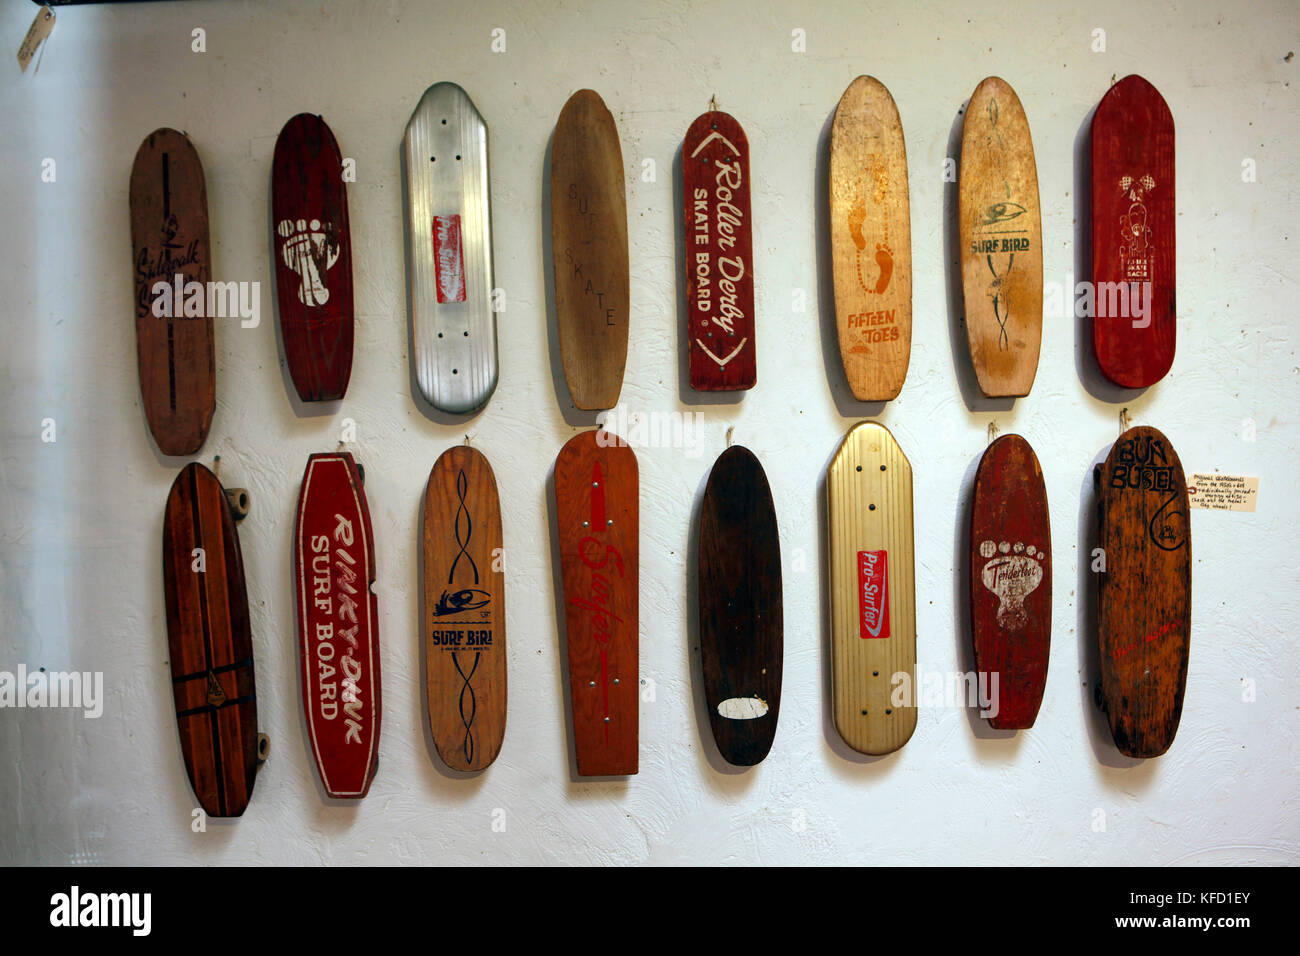 USA, Los Angeles, skateboards on the wall of a shop on Abbot Kinney  Boulevard Stock Photo - Alamy